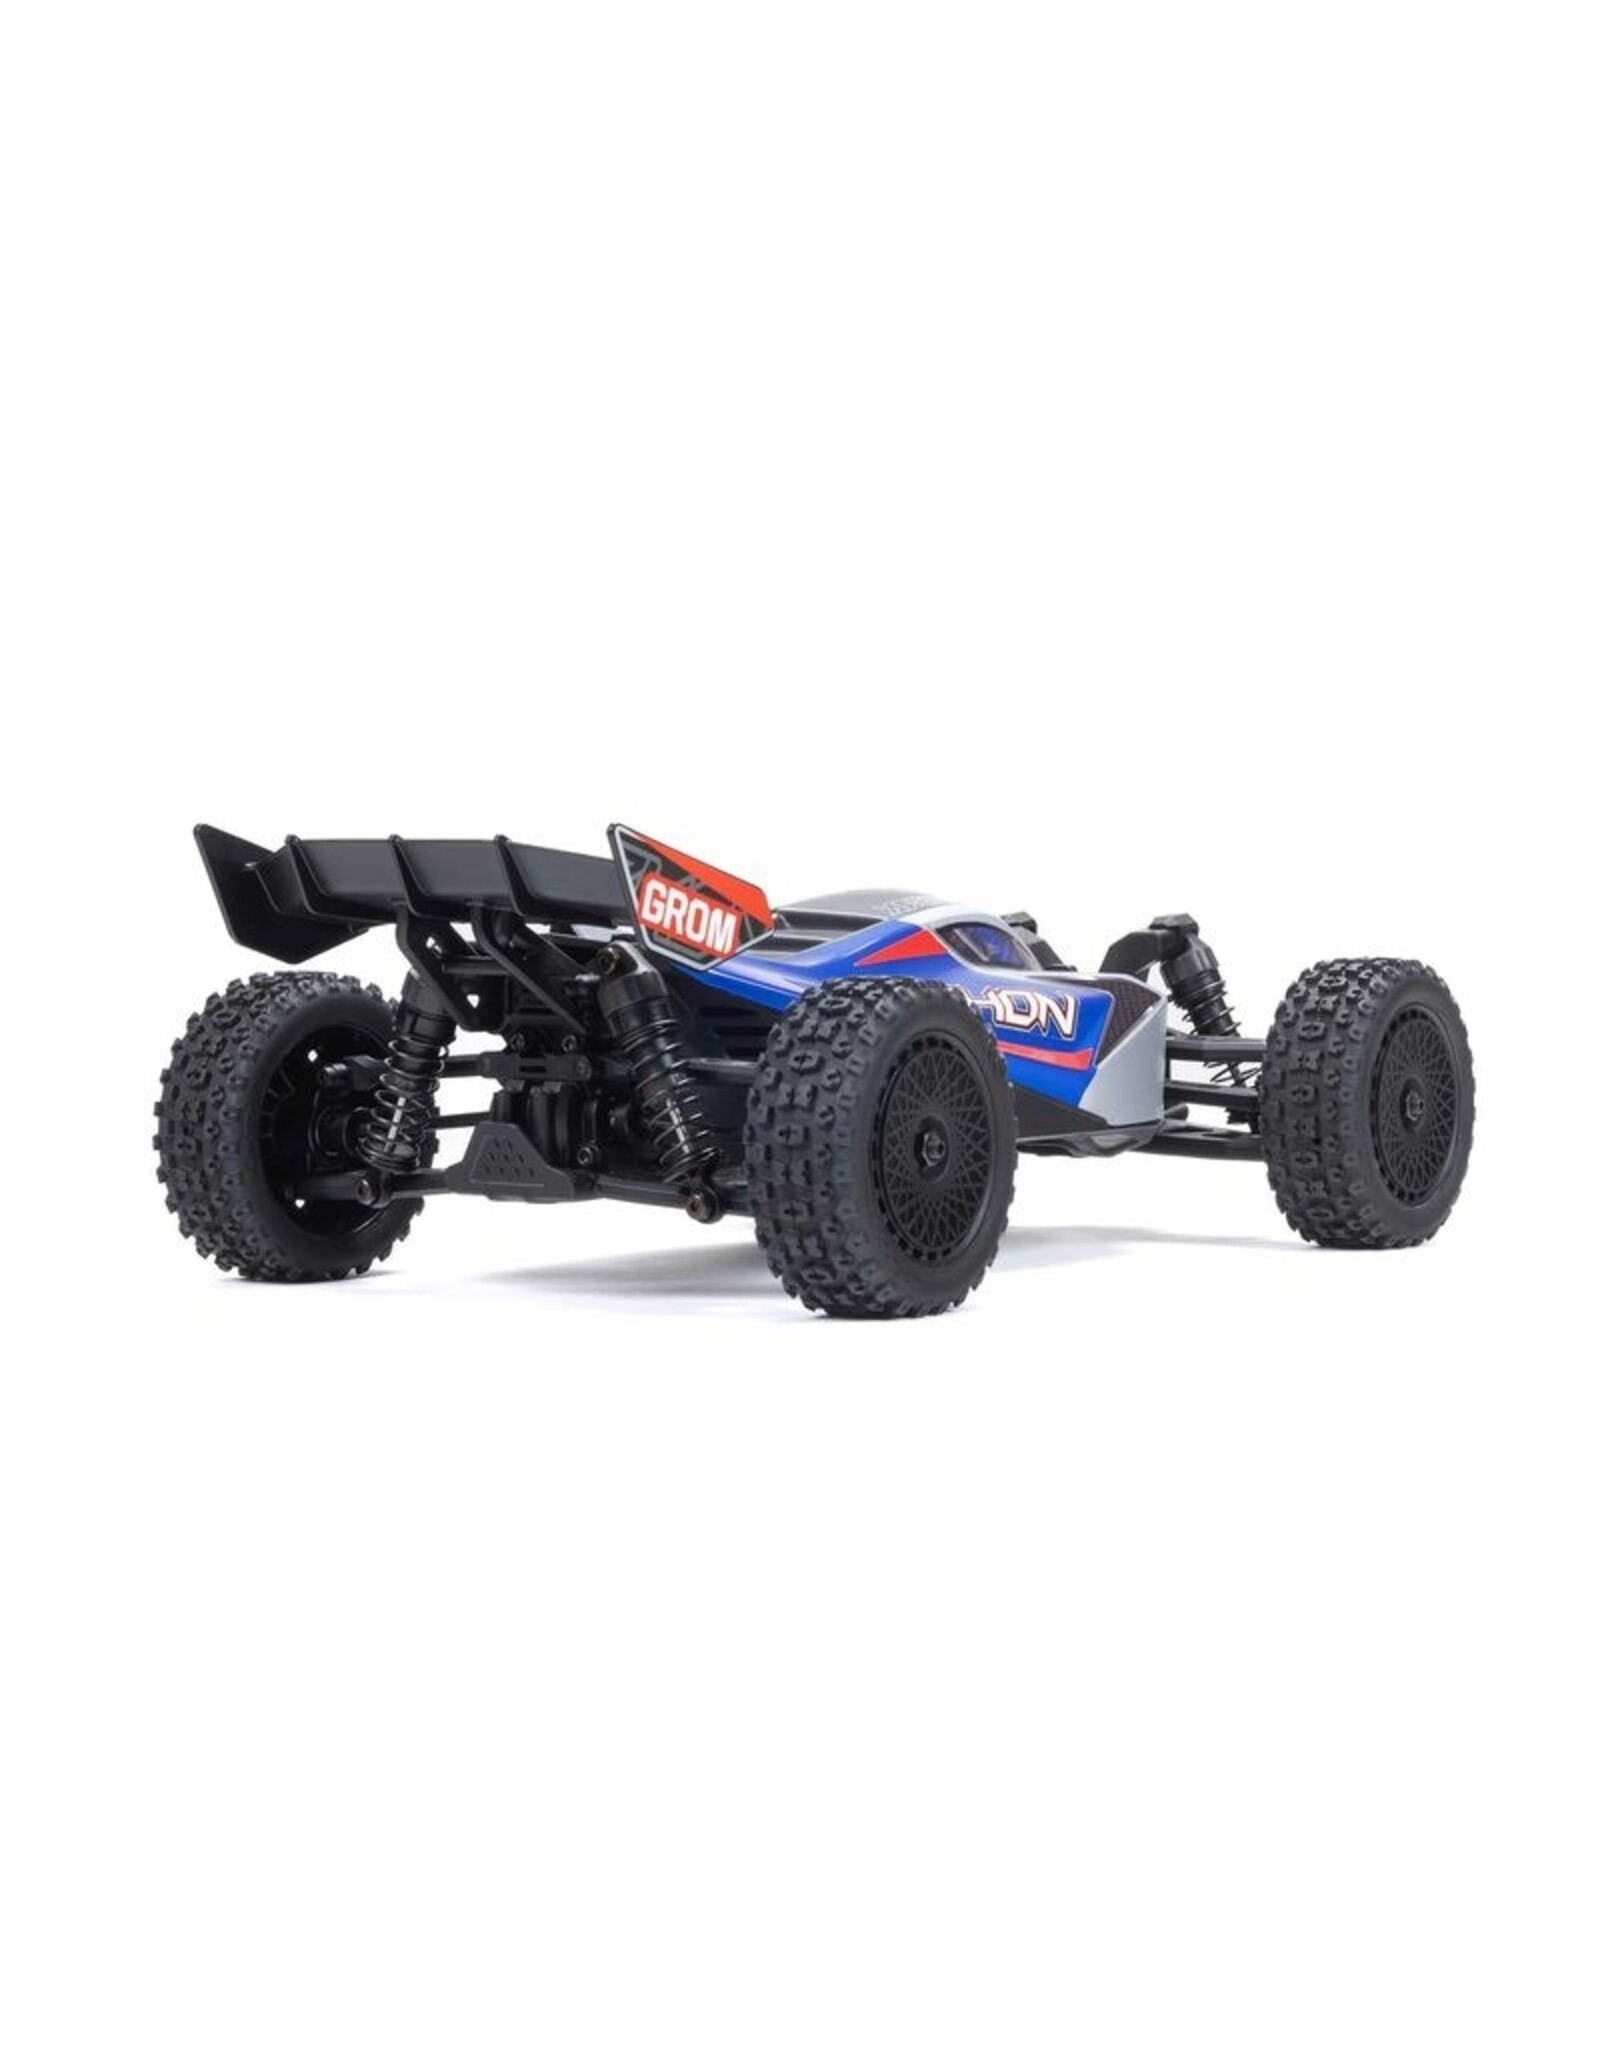 Arrma ARA2106T1 TYPHON GROM 4x4 SMART Small Scale Buggy Blue/Silver